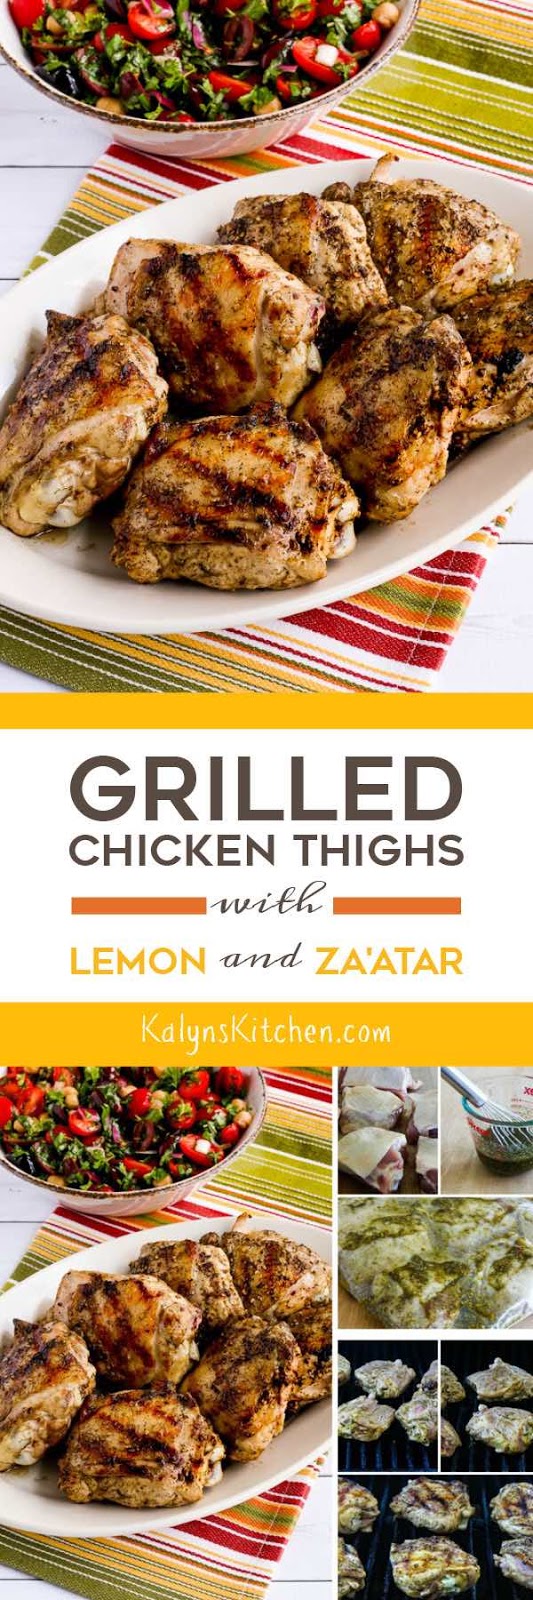 Grilled Chicken Thighs with Lemon and Za'atar - Kalyn's Kitchen